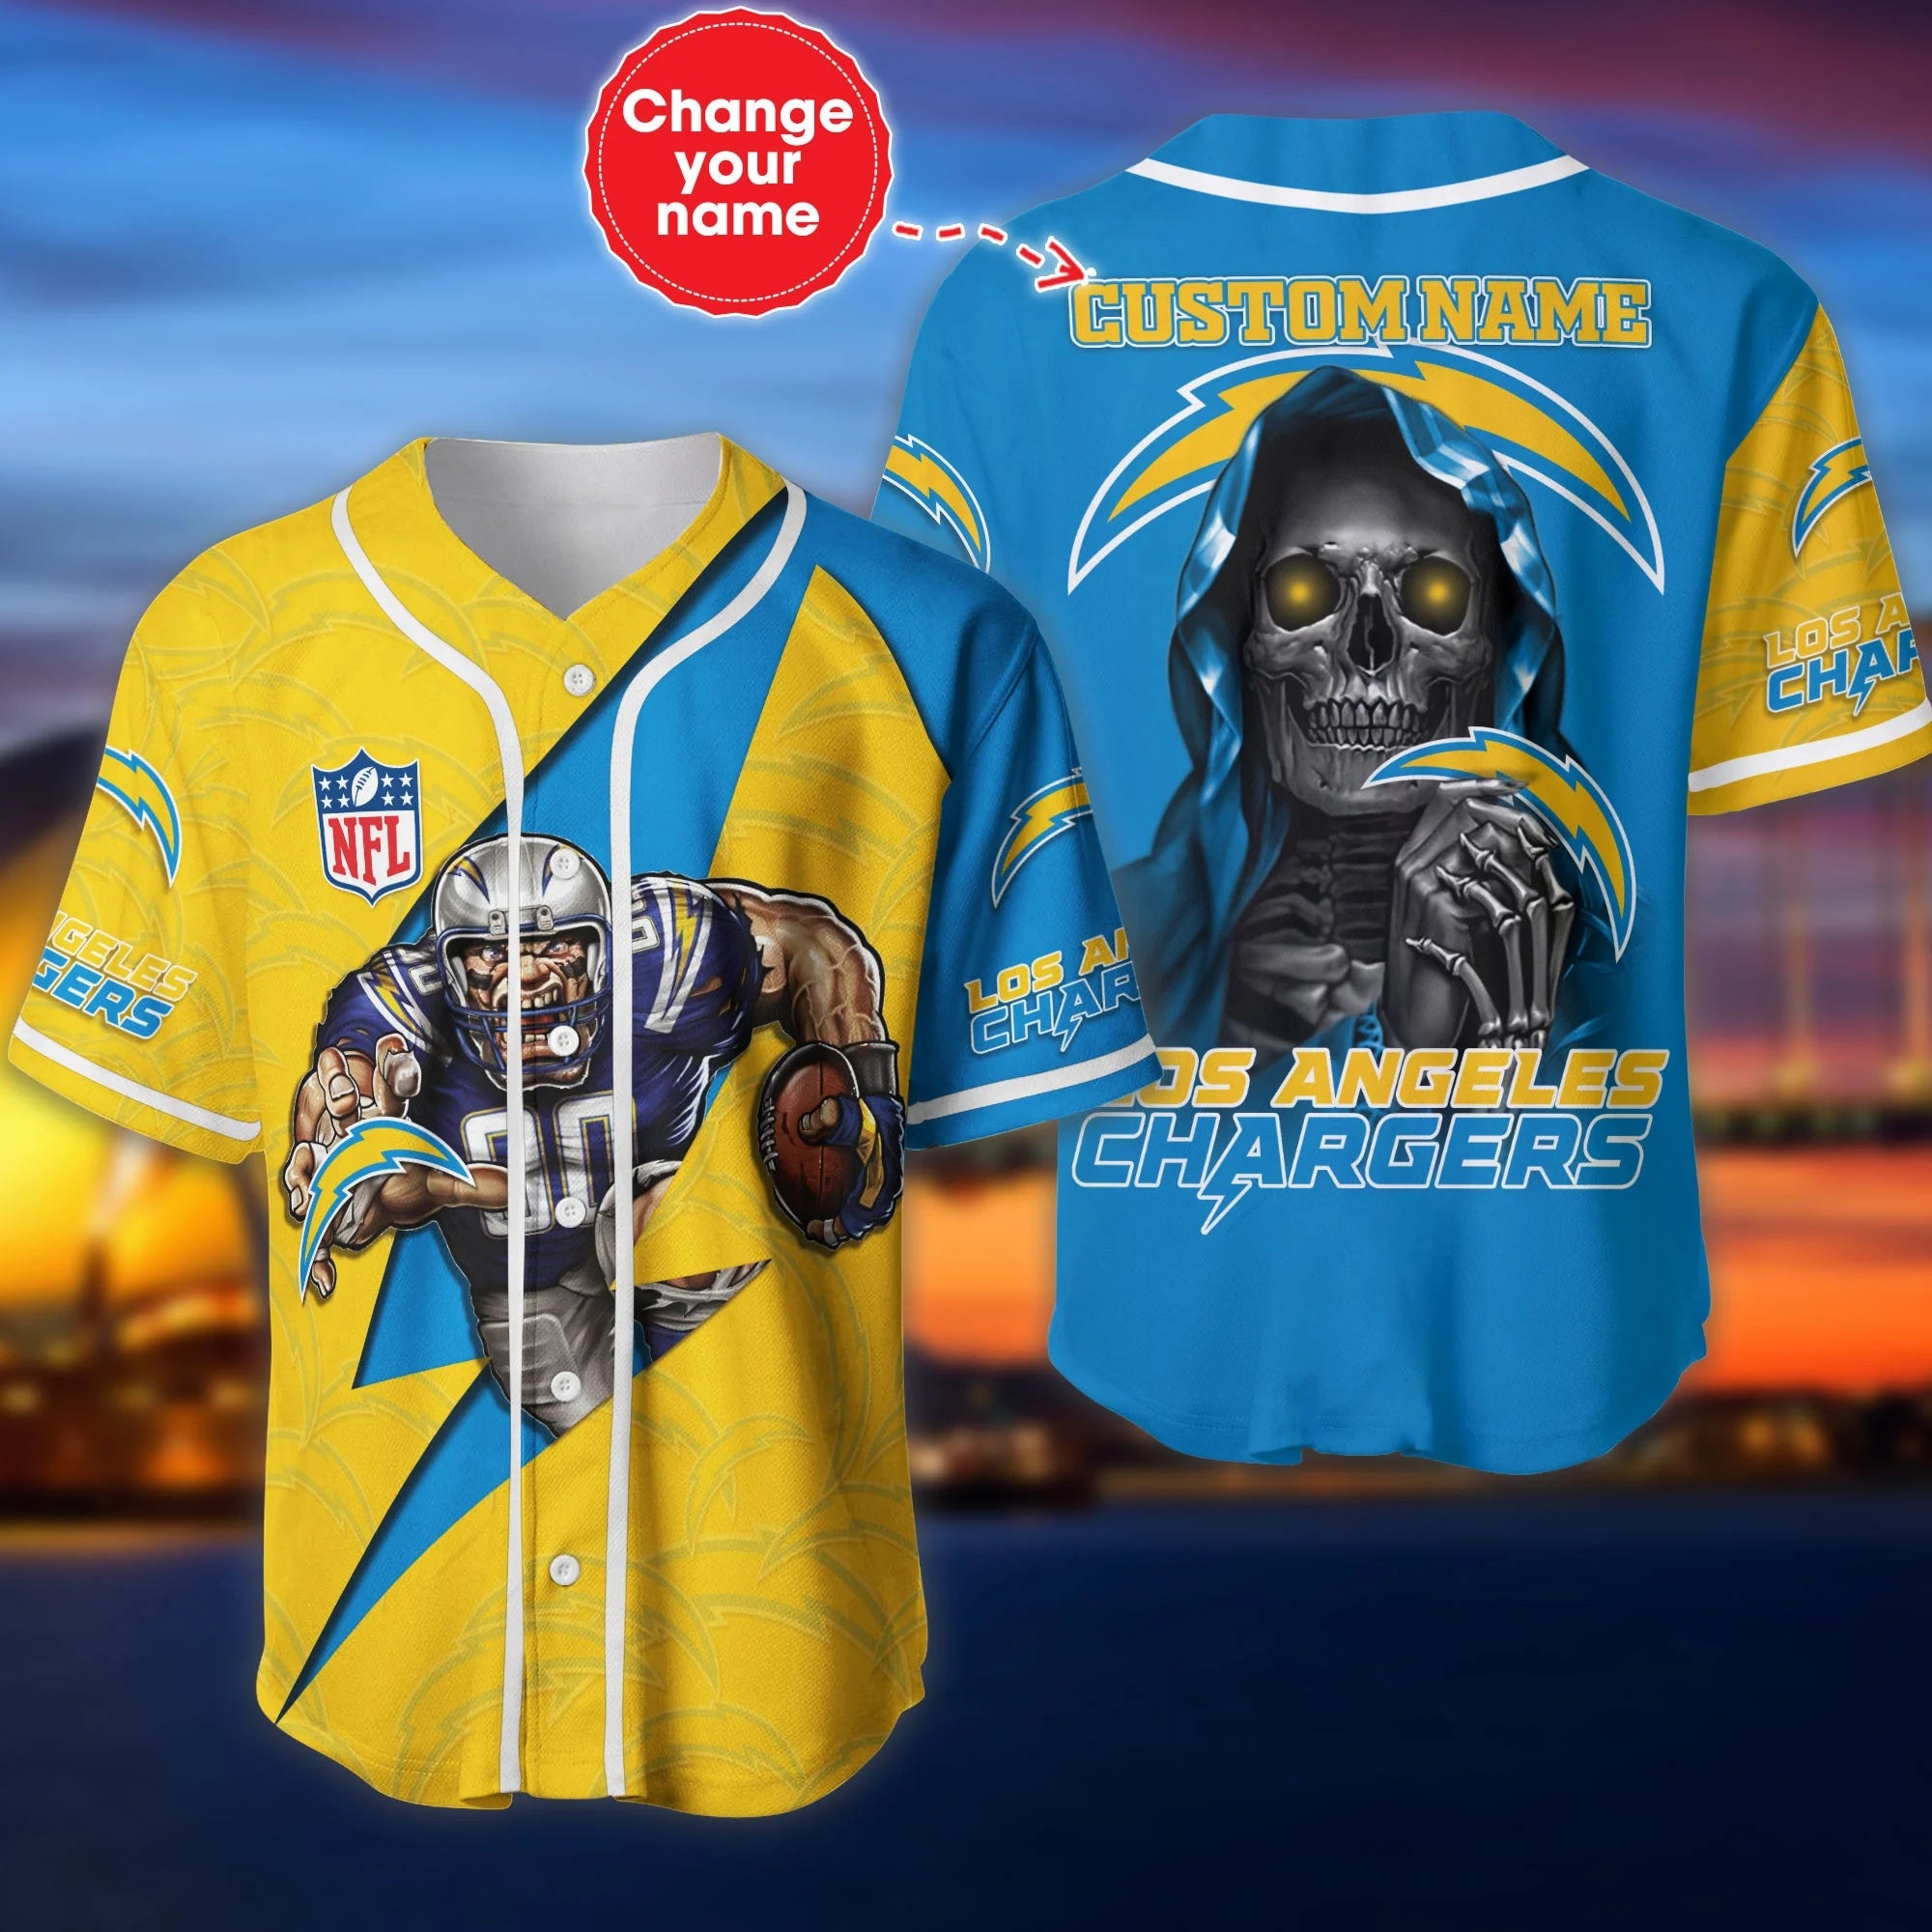 Lowest Price Los Angeles Chargers Baseball Jersey Shirt Skull